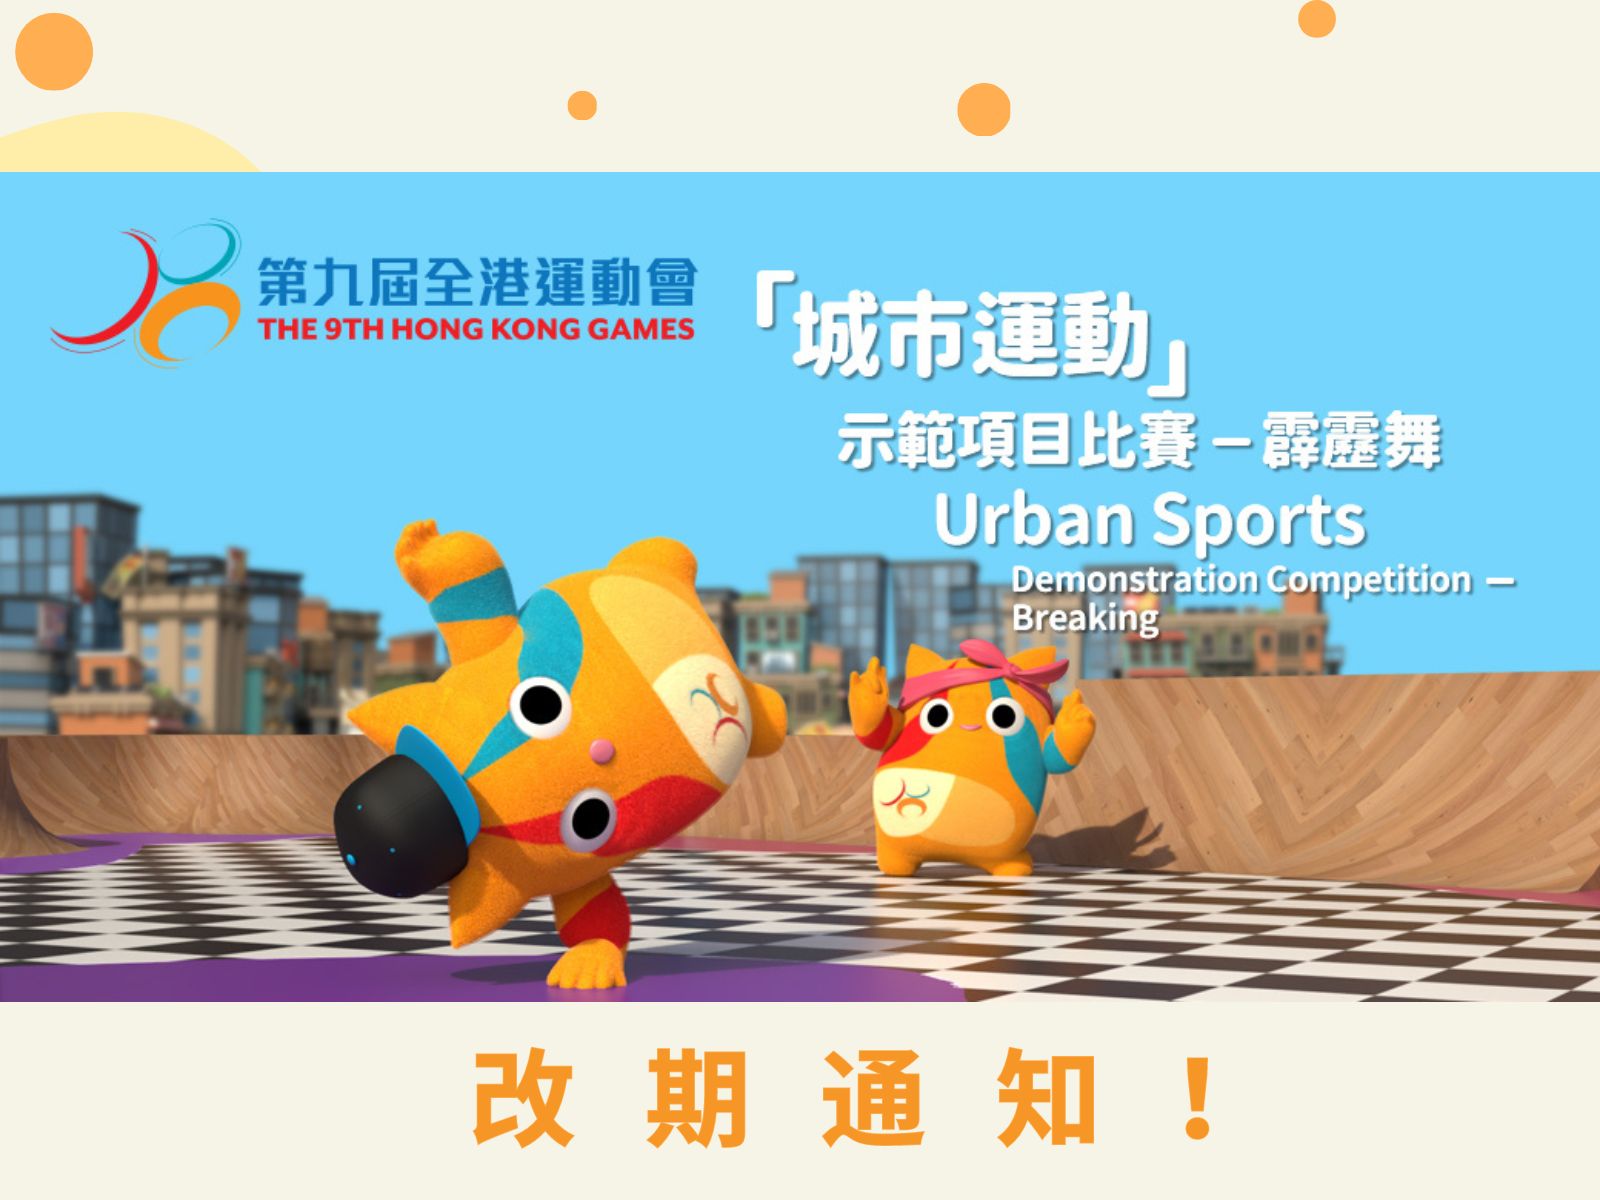 【The 9th Hong Kong Games Demonstration Competitions for Urban Sports – Breaking】Rescheduling notice